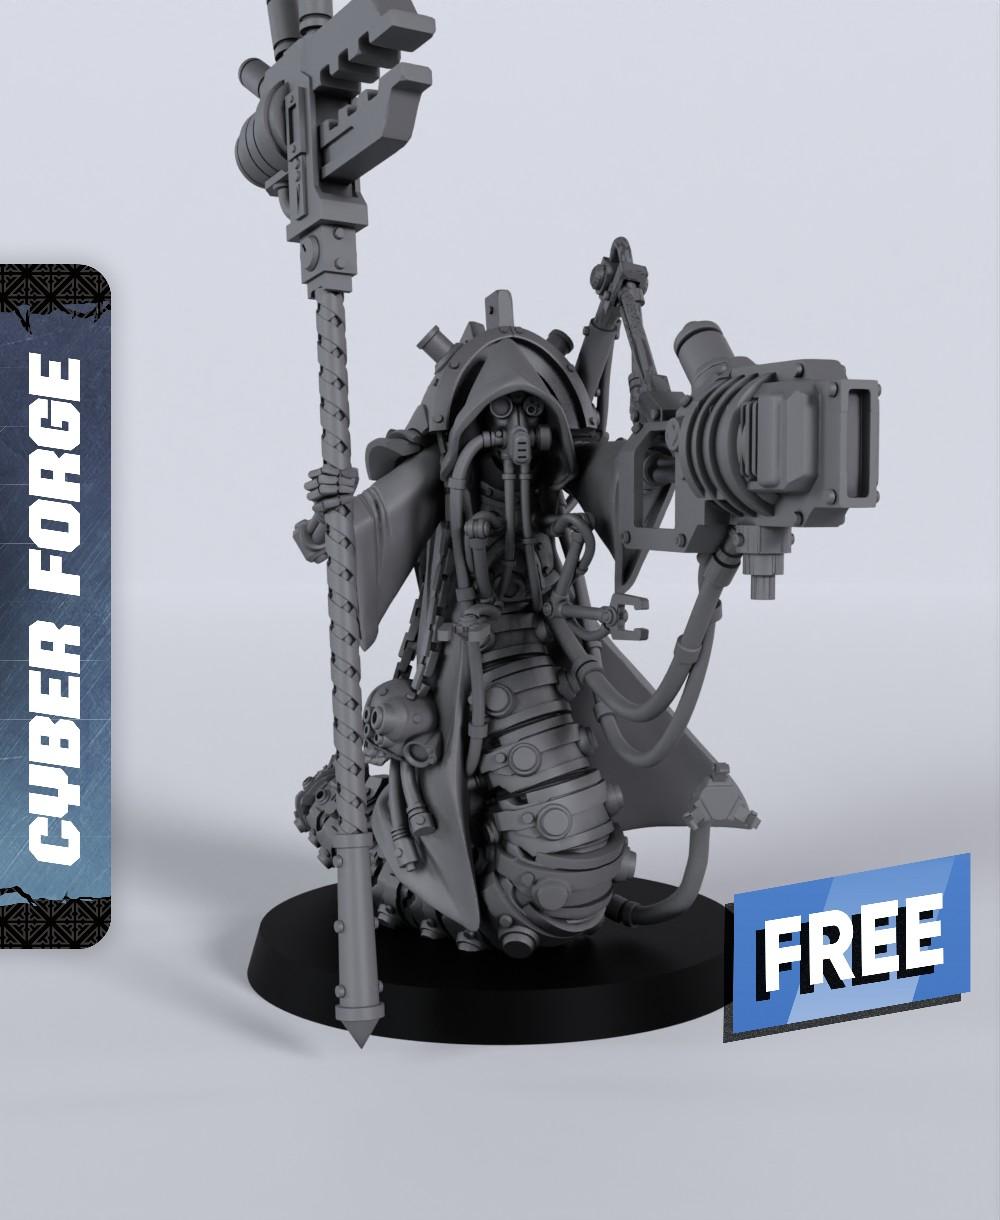 High Priest Opressor - With Free Cyberpunk Warhammer - 40k Sci-Fi Gift Ideas for RPG and Wargamers 3d model